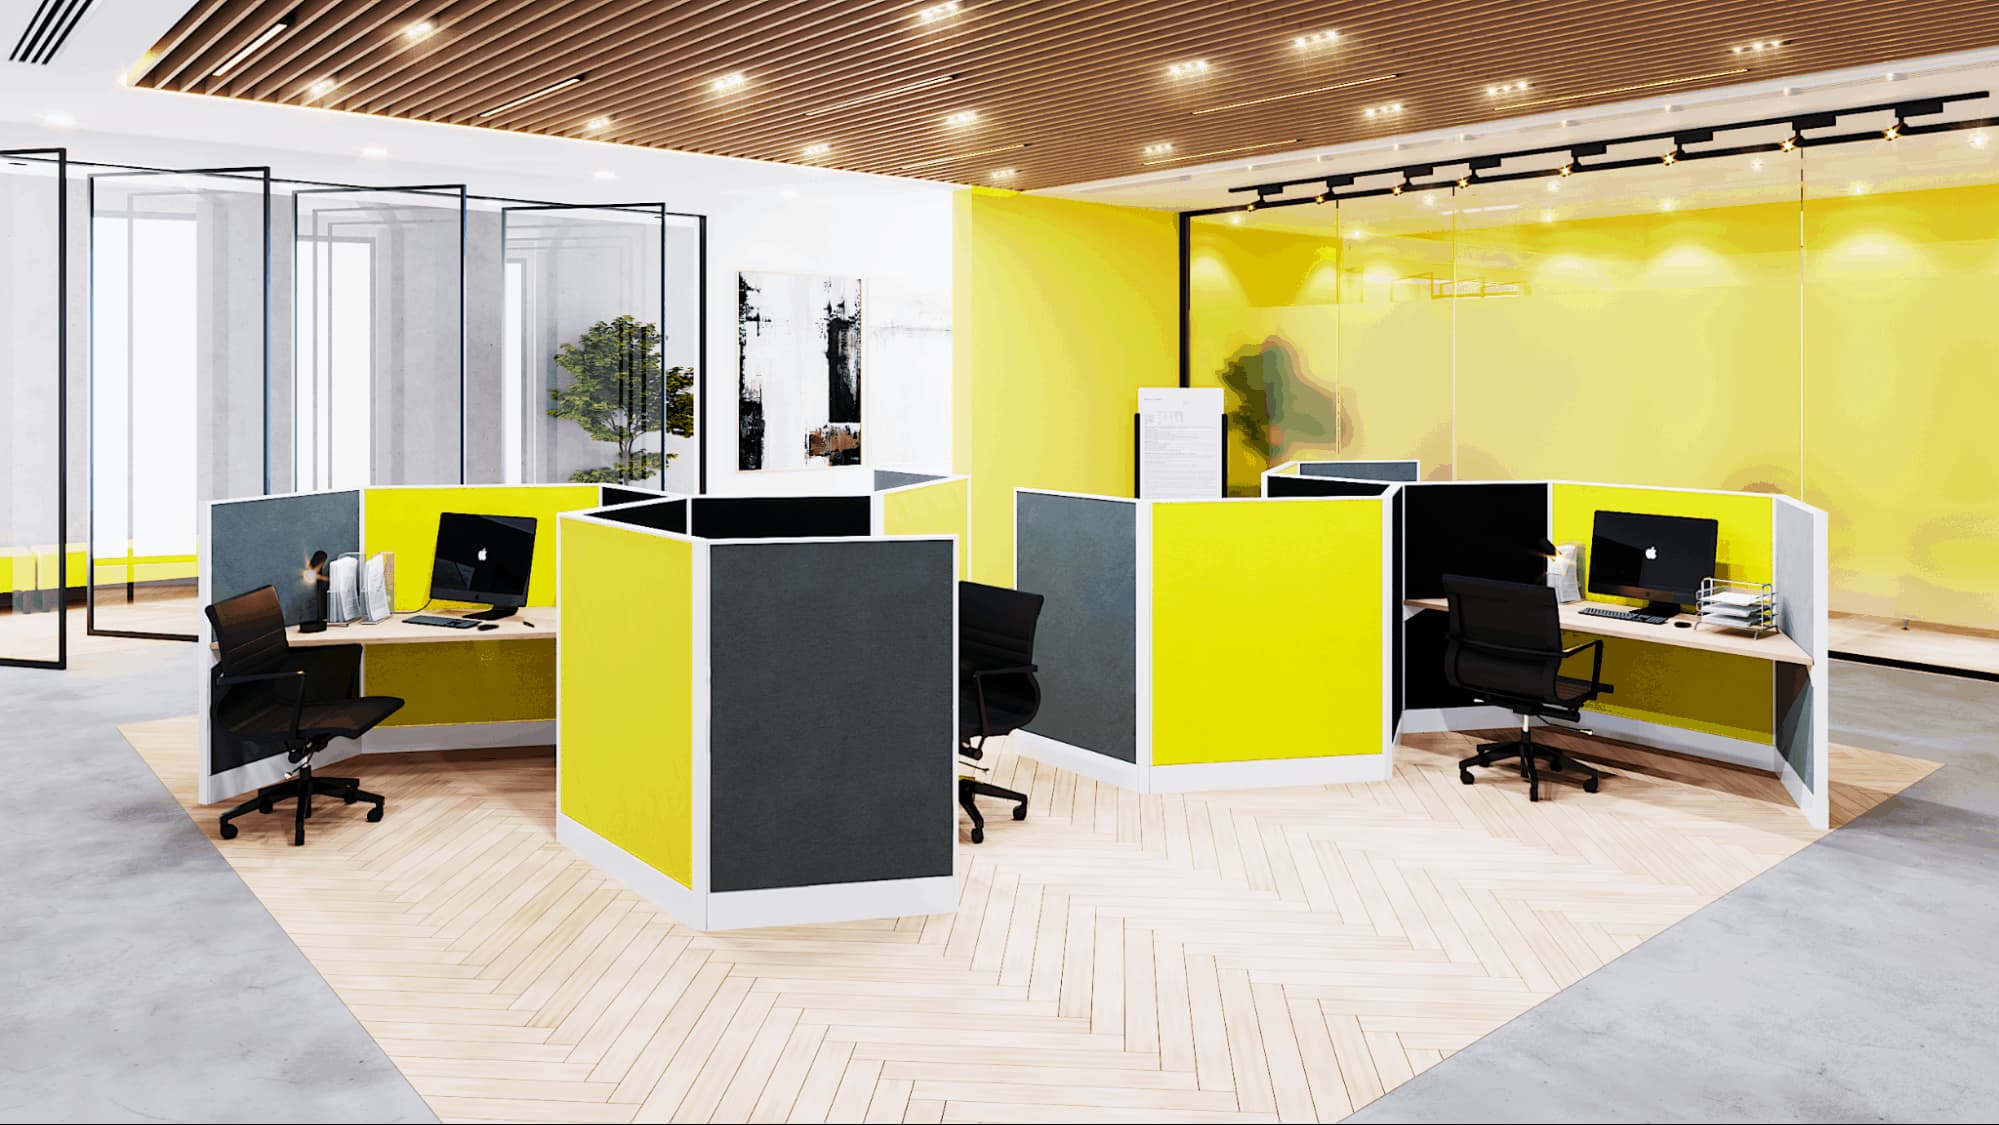 Custom office furniture: how to reflect your brand personality with it